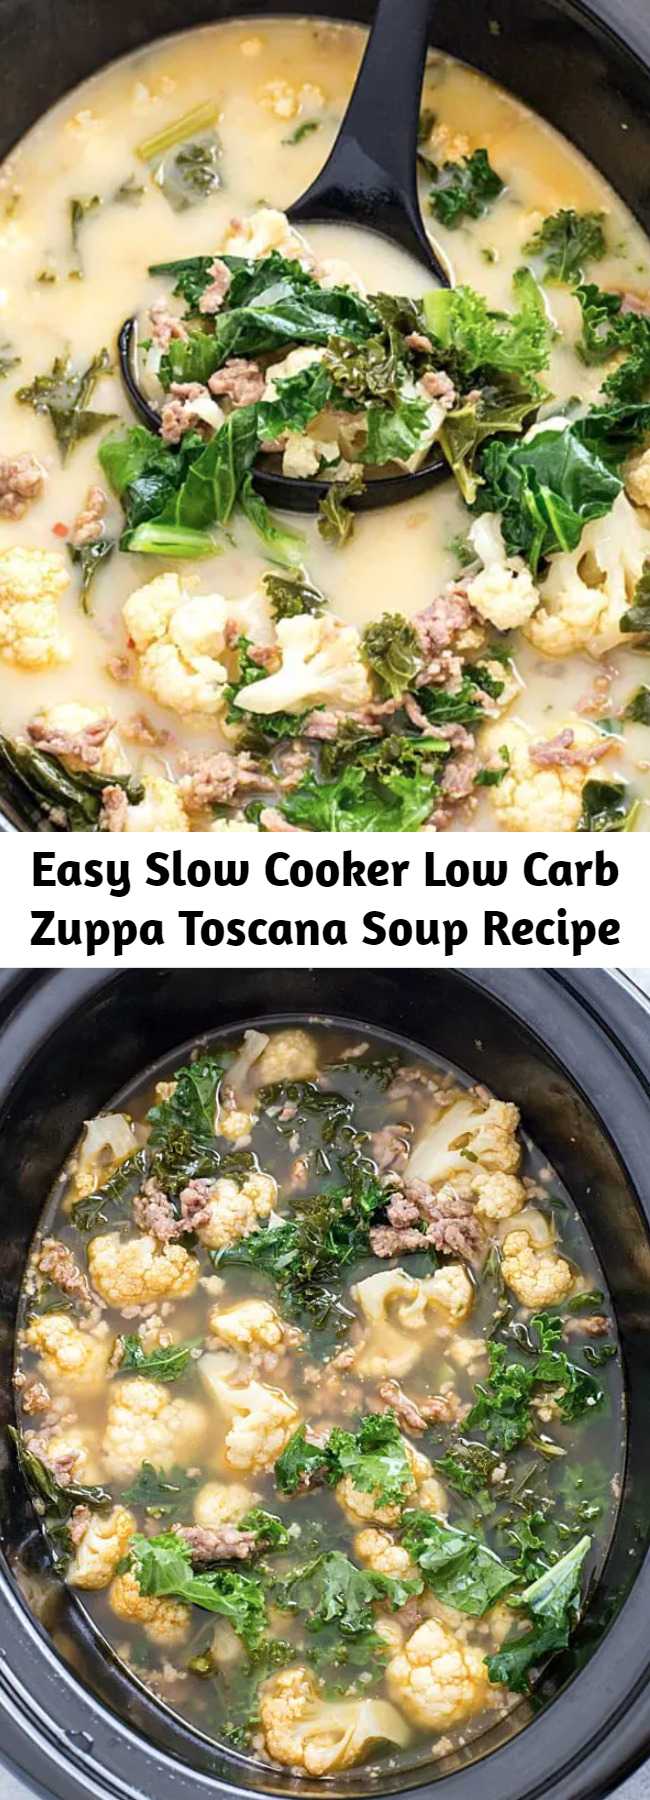 Easy Slow Cooker Low Carb Zuppa Toscana Soup Recipe - Slow Cooker Low Carb Zuppa Toscana Soup - Skip the trip to your local restaurant and make a batch of this insanely delicious copycat soup! It's healthy, it's delicious, and it's made low carb! Perfect for a low carb and keto-friendly lifestyle!